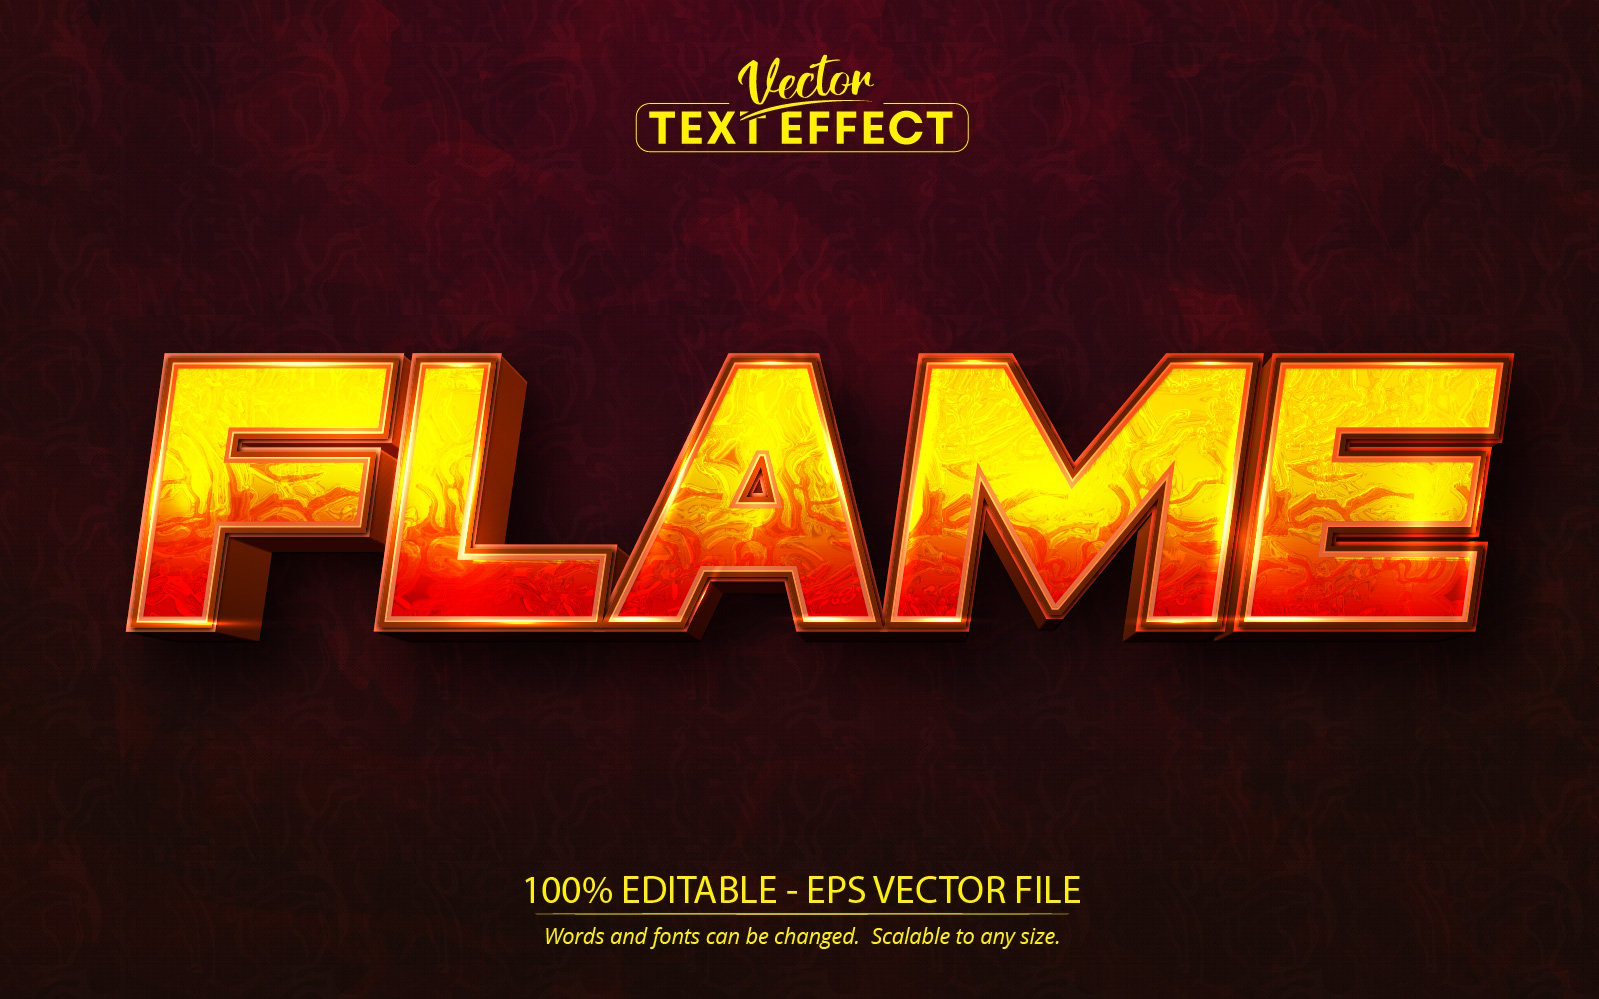 Flame - Editable Text Effect, Shiny Fire Texture Text Style, Graphics Illustration